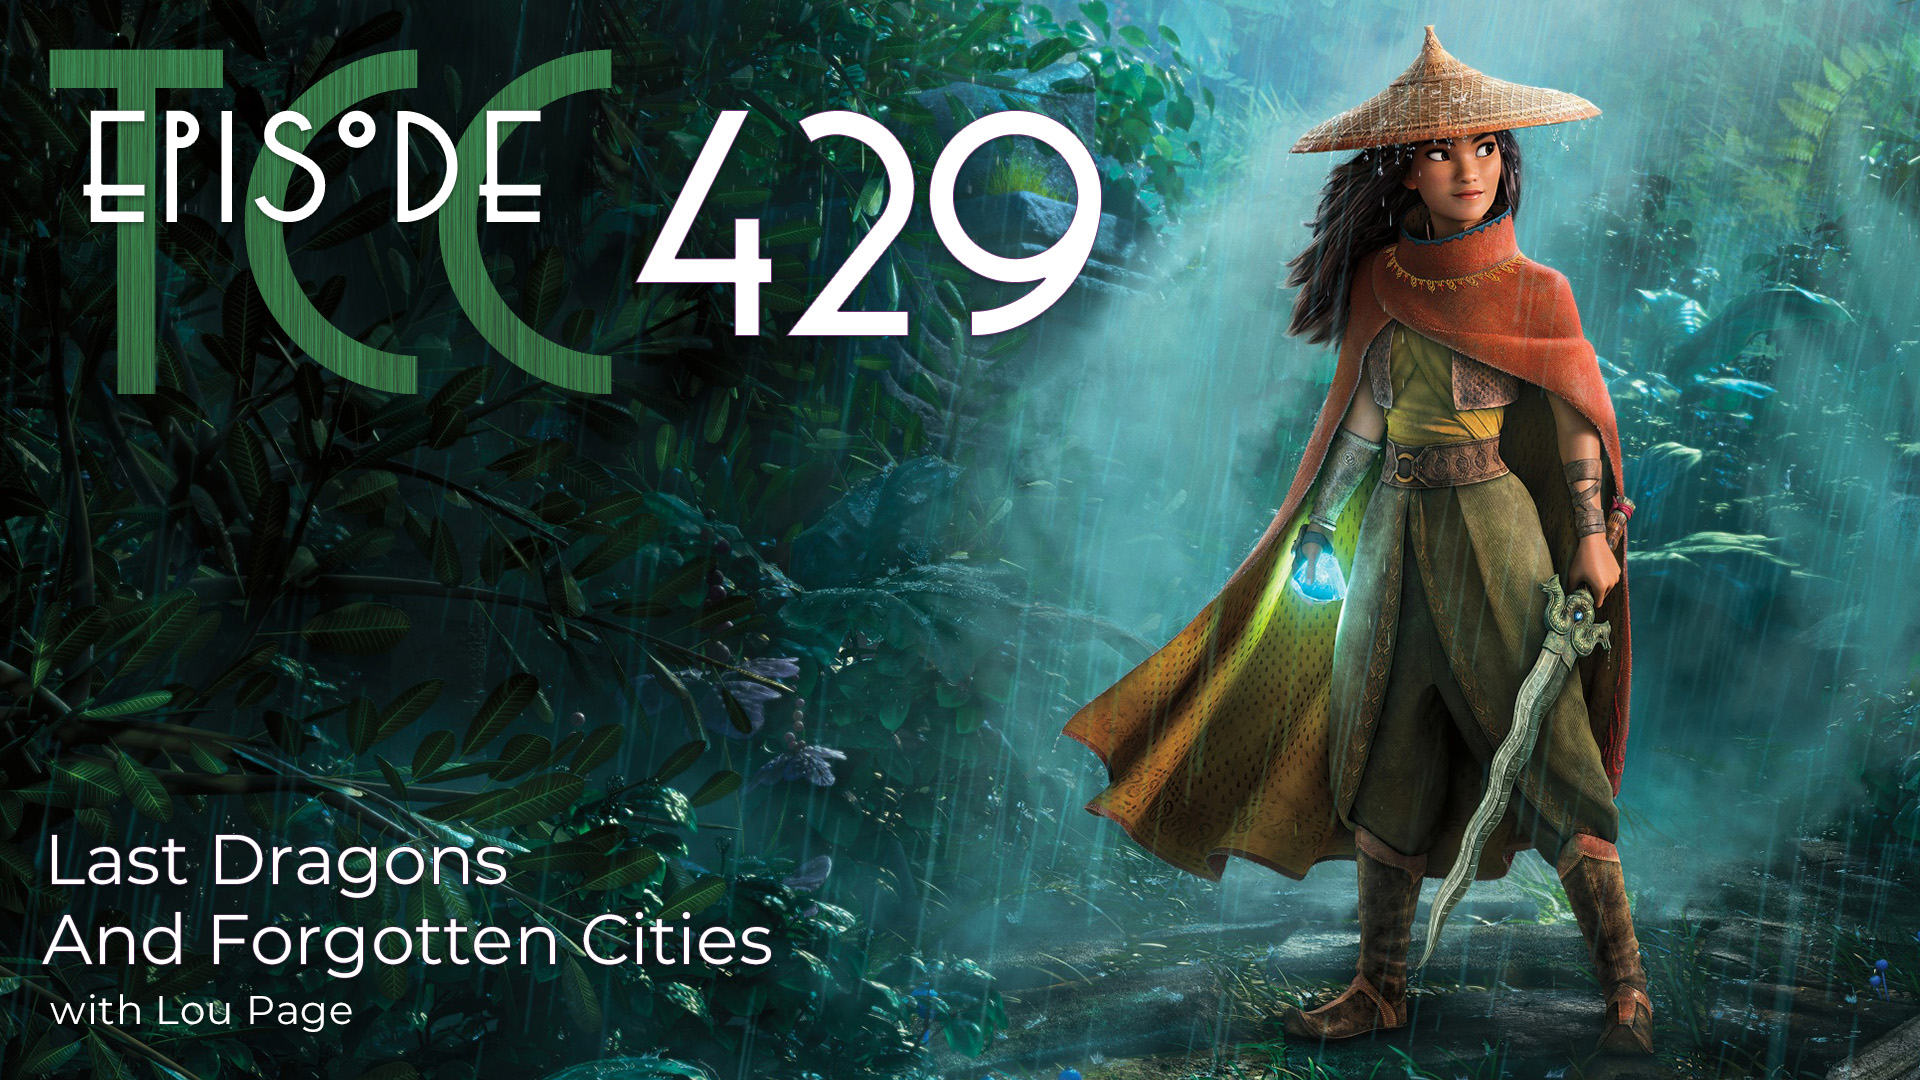 The Citadel Cafe 429: Last Dragons And Forgotten Cities